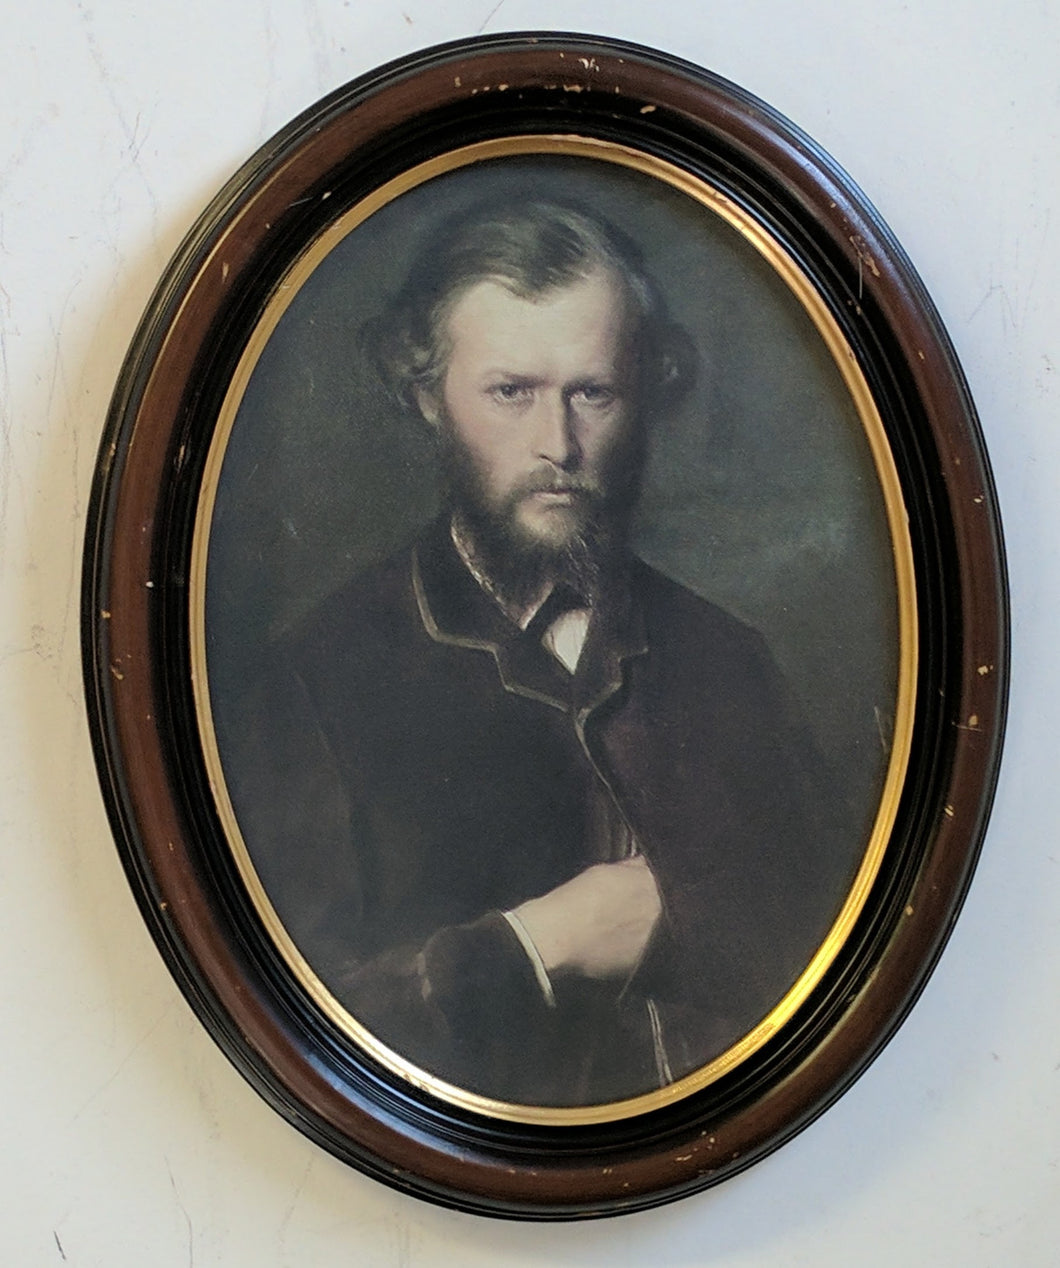 D-1156 Oval Colorized Portrait of the Founder of Glenfiddich Whisky ca 1870